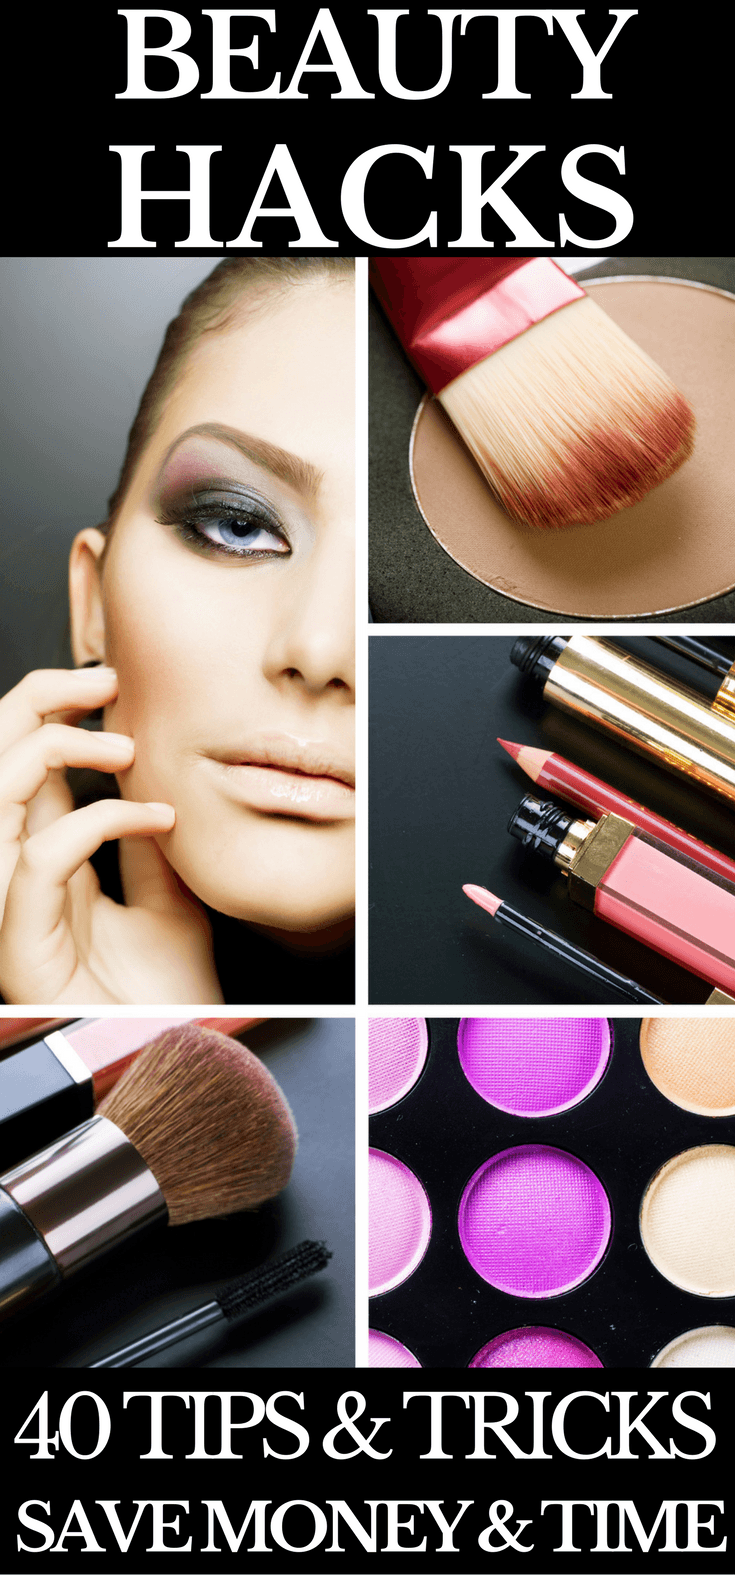 40 Beauty Hacks That Will Save You Time & Money An amazing list of beauty tips from how to fix a broken lipstick to DIY manicures. Every girl should know these life changing beauty hacks that will save you time and money. If you’re on a budget & you’re looking for the best beauty tips & tricks around this is a must read!